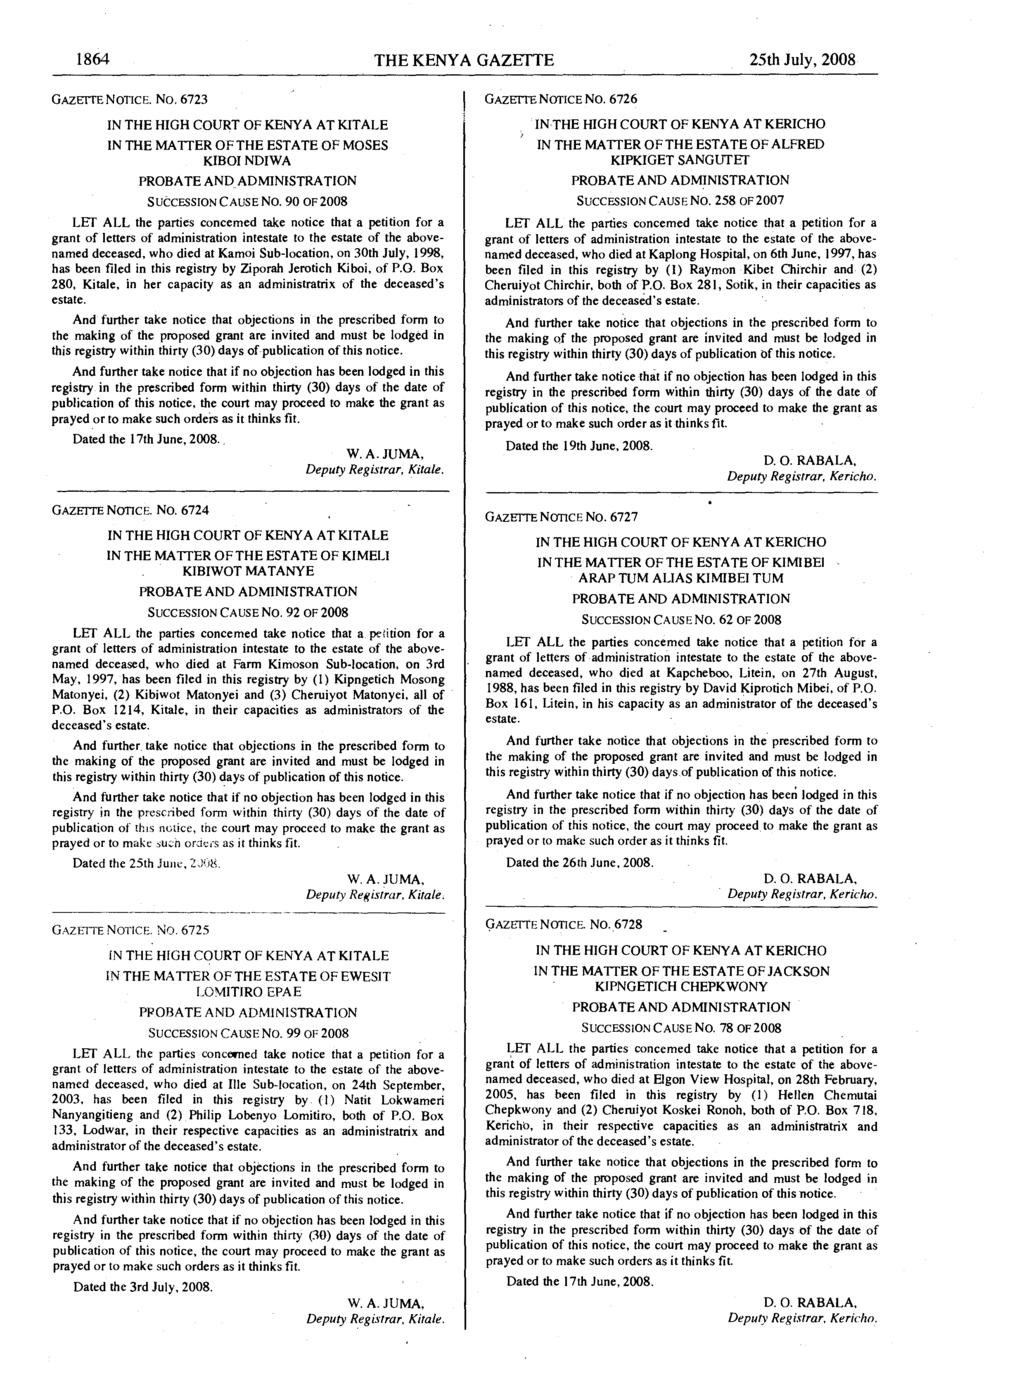 1864 THE KENYA GAZETTE 25th July, 2008 GAZEI IbNOTICE. No. 6723 IN THE HIGH COURT OF KENYA AT KITALE IN THE MATTER OF THE ESTATE OF MOSES KIBOI NDIWA PROBATE AND_ ADMINISTRATION SUCCESSION CAUSE No.